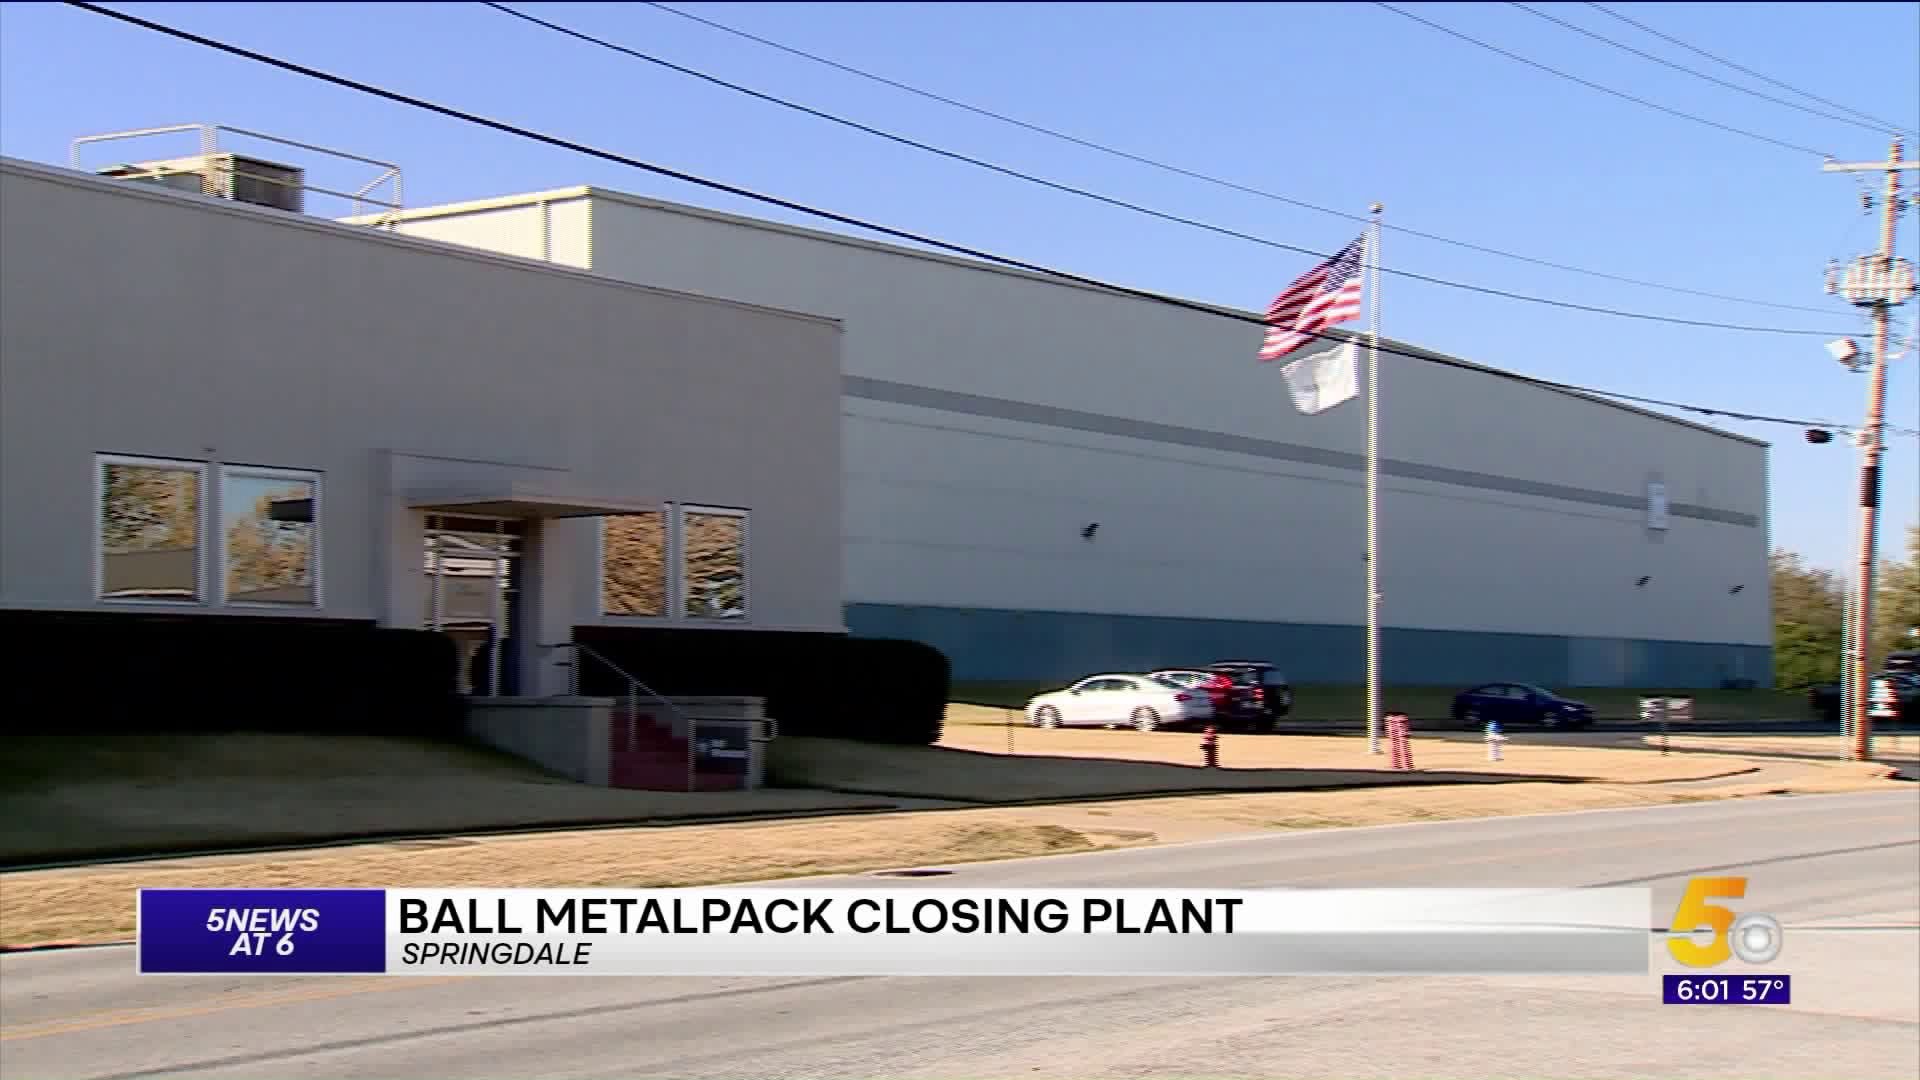 Ball Metalpack Closing Springdale Plant, Over 70 Employees Losing Their Jobs